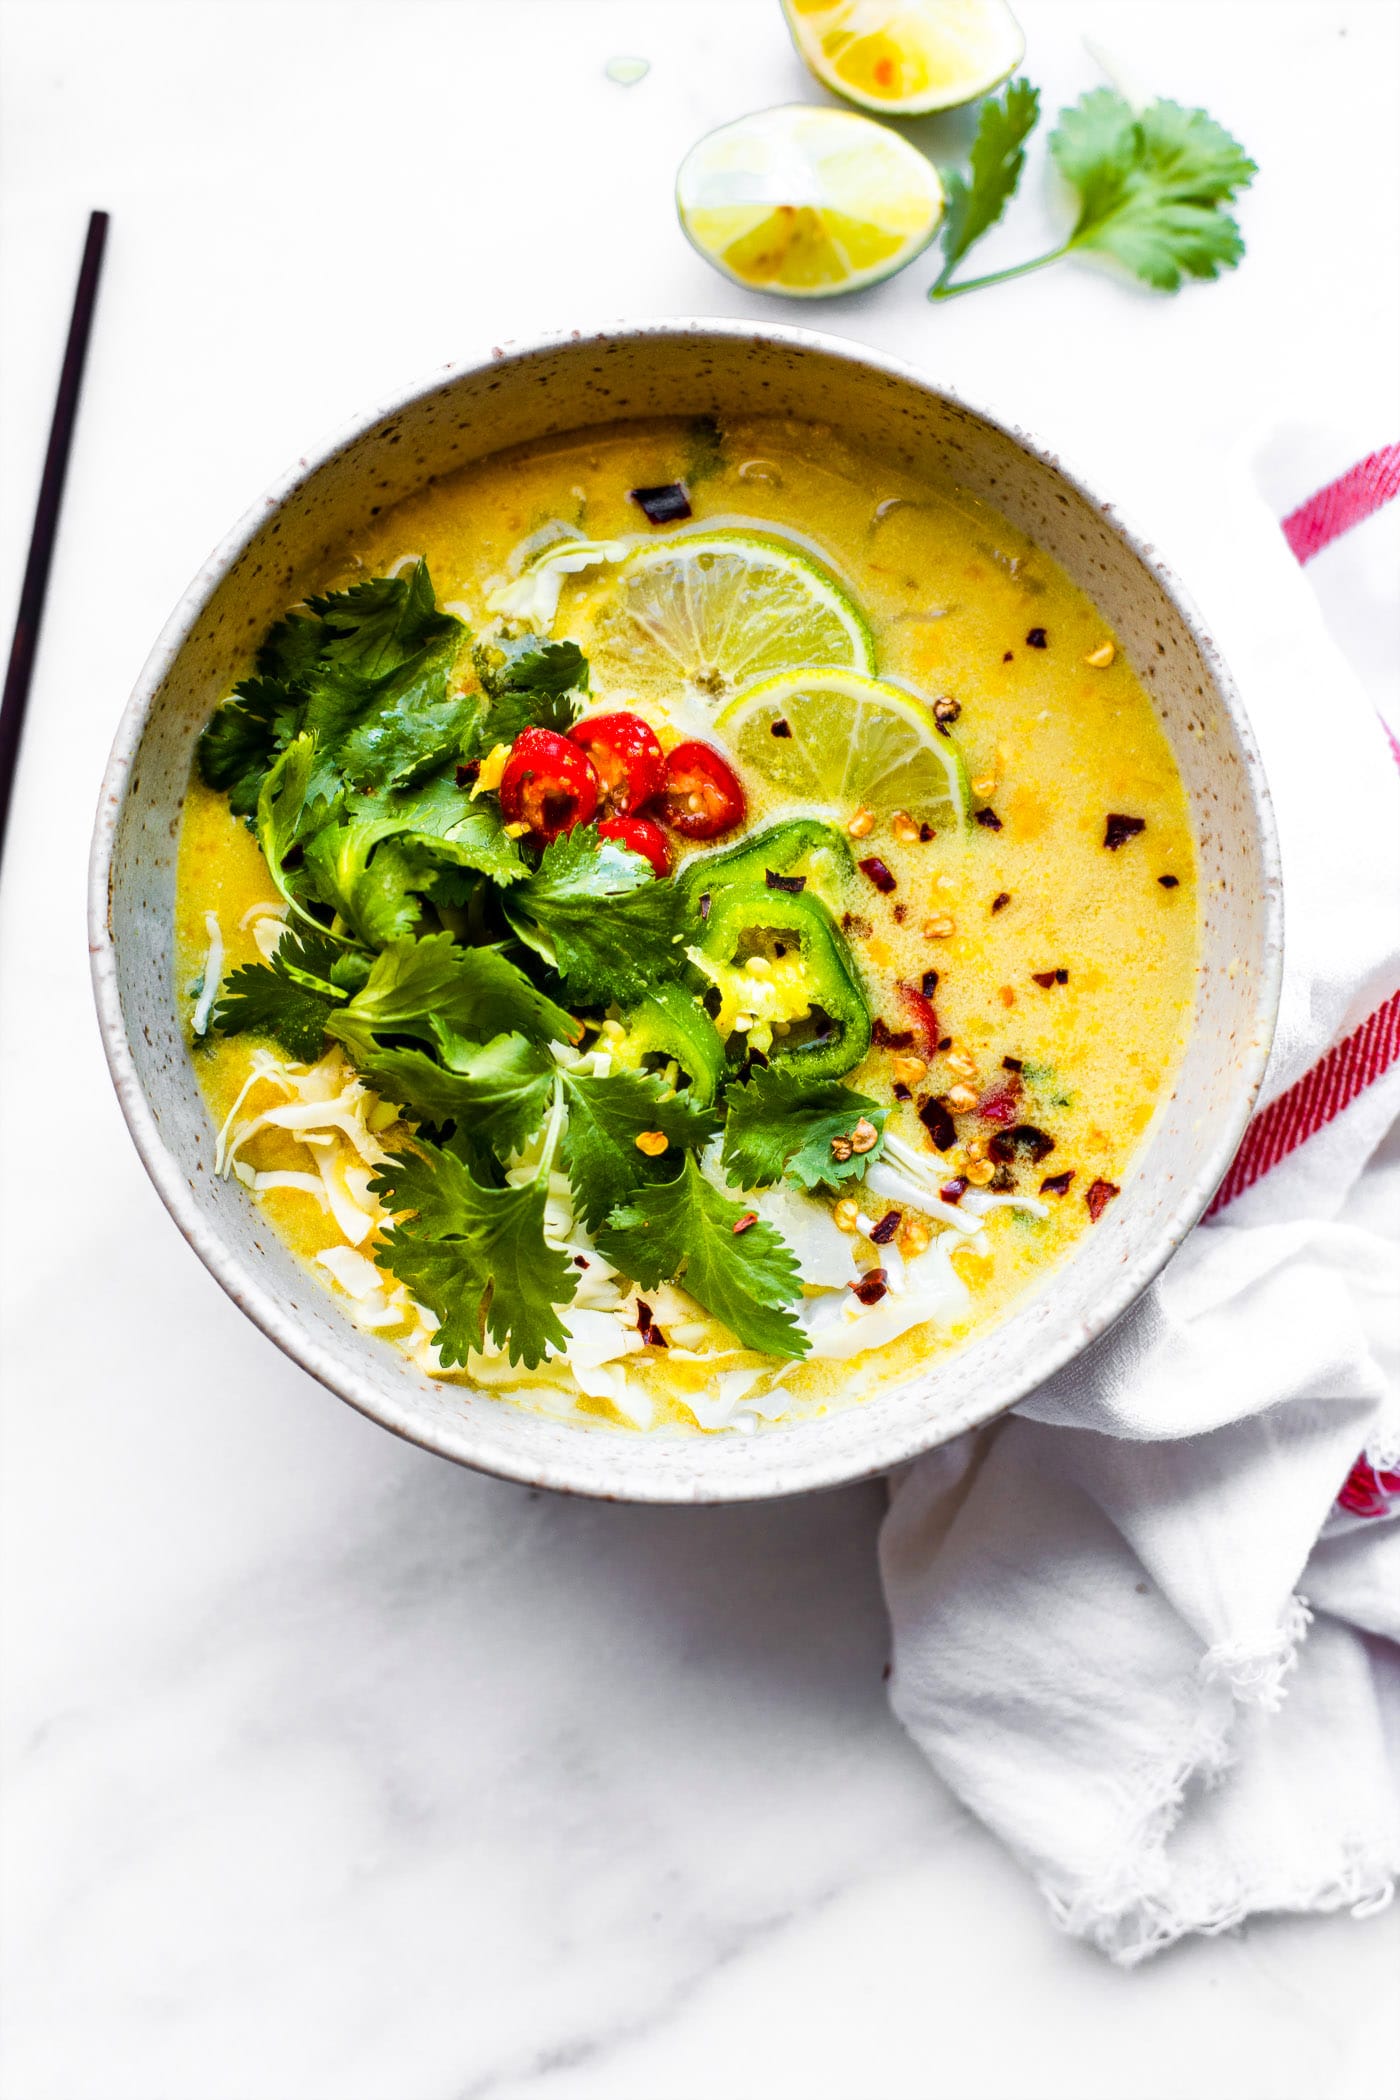 Thai Coconut Milk Cabbage soup packed with flavor and nourishment! A Thai Coconut Paleo soup recipe made with real ingredients; coconut milk, cabbage, lemongrass, broth, curry, and Thai Chili peppers. It is quick to make, plus it keeps you warm during winter! Vegan friendly.